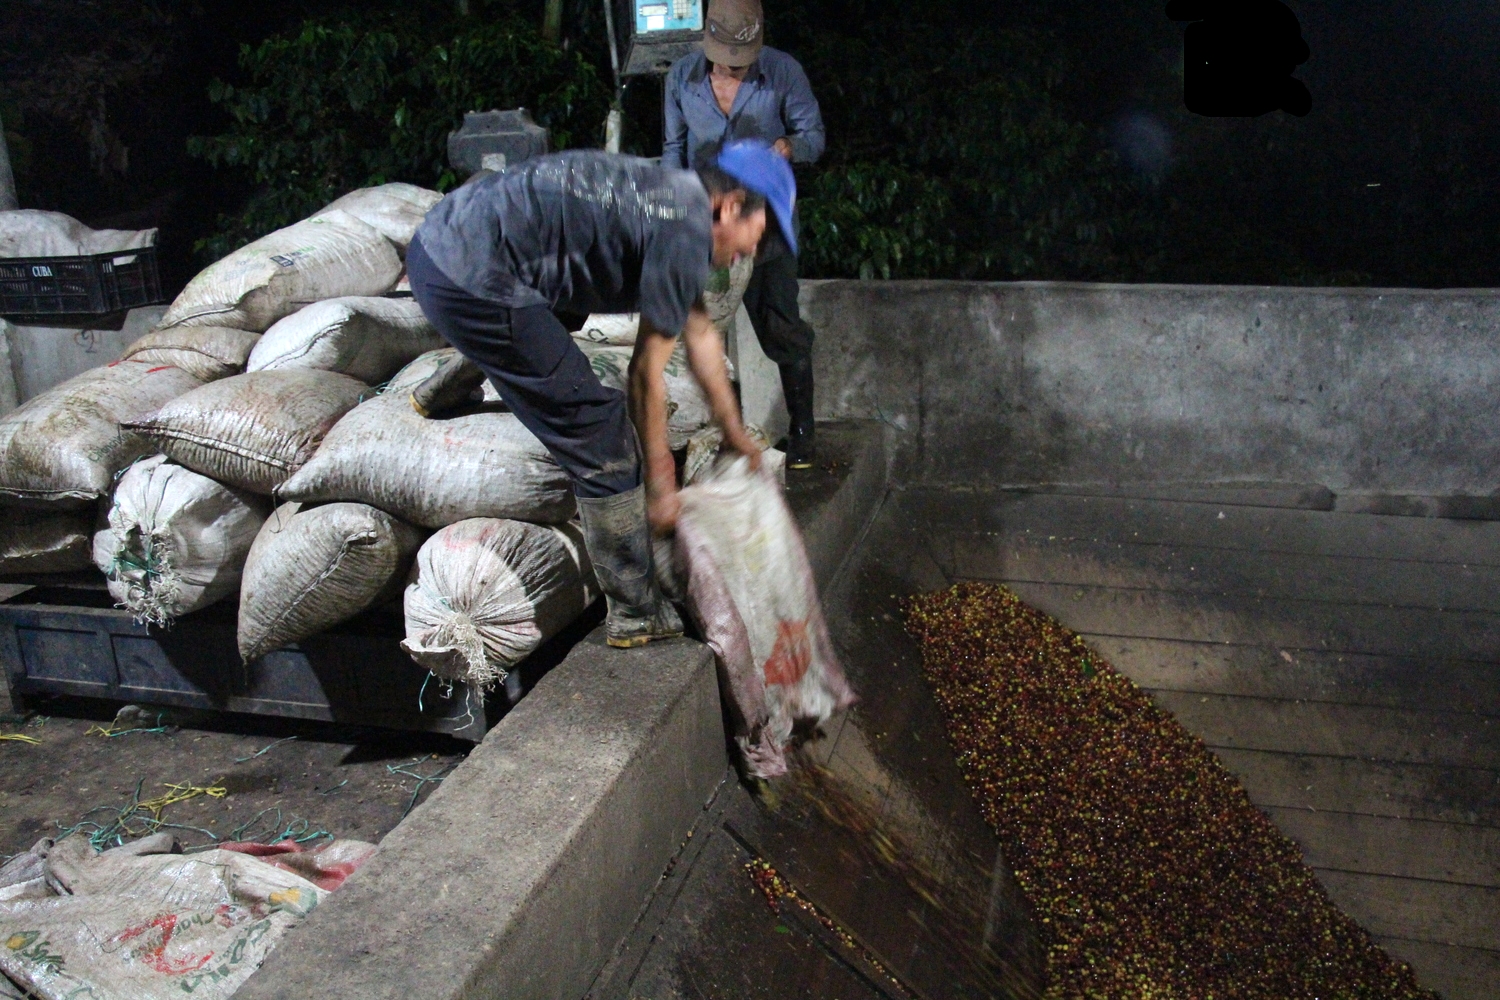 Tipping coffee into the vat